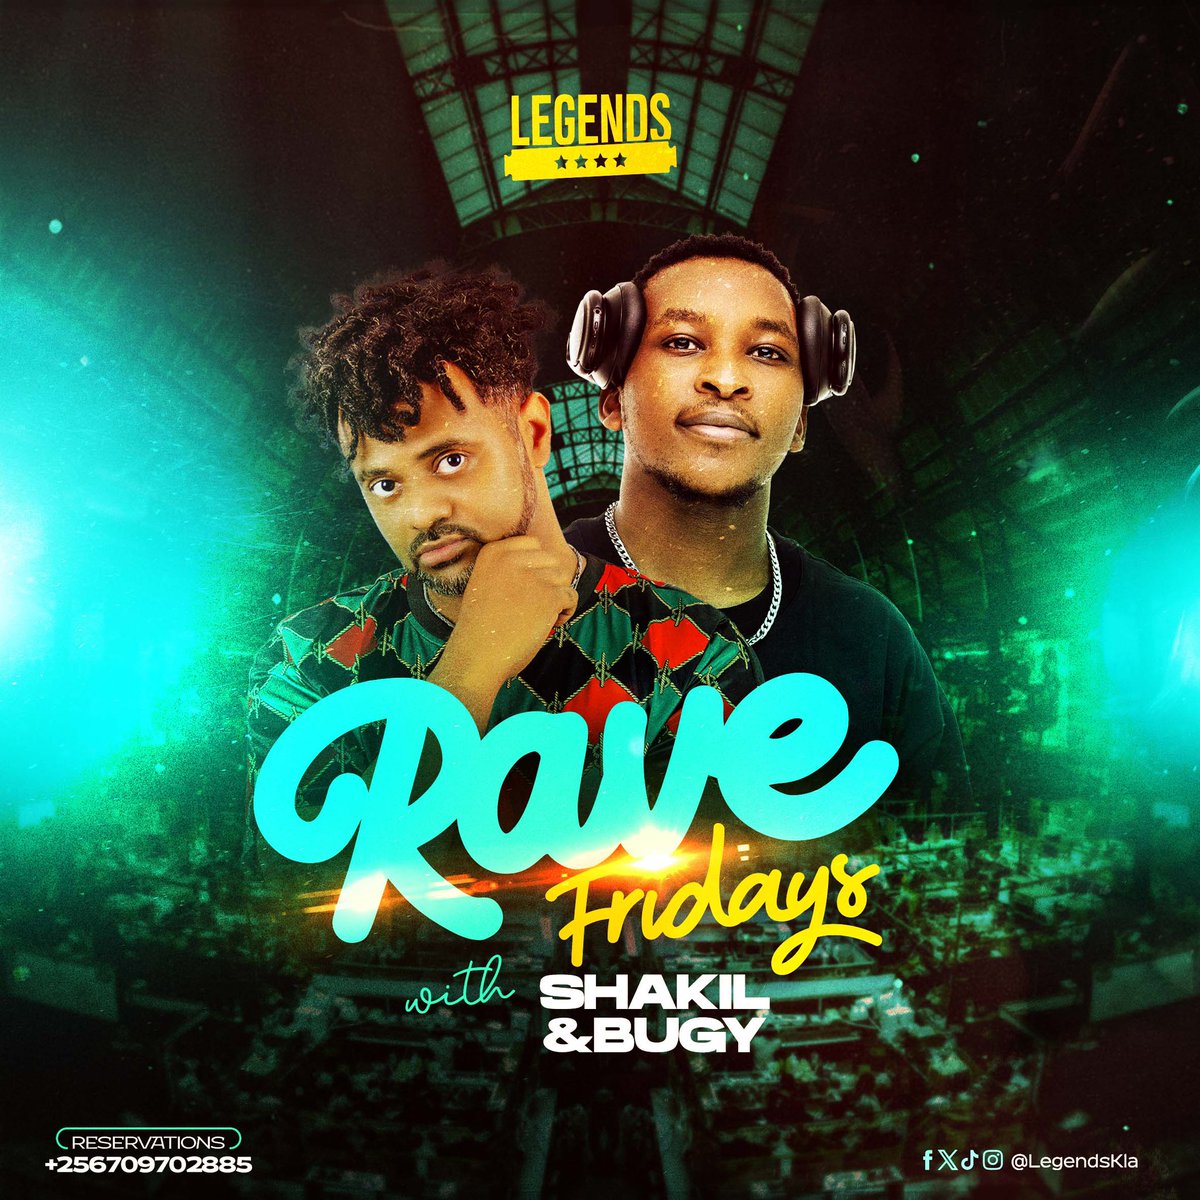 Friday Frenzy🤩 Prepare for a night of non-stop beats with our incredible DJ lineup tonight 🎶✨ Join us for an evening brimming with music, delicious bites, & limitless fun 😋🍕🍹🍻 Kick off the #Weekend with high energy & excitement 🥳💯 #RaveFridayz